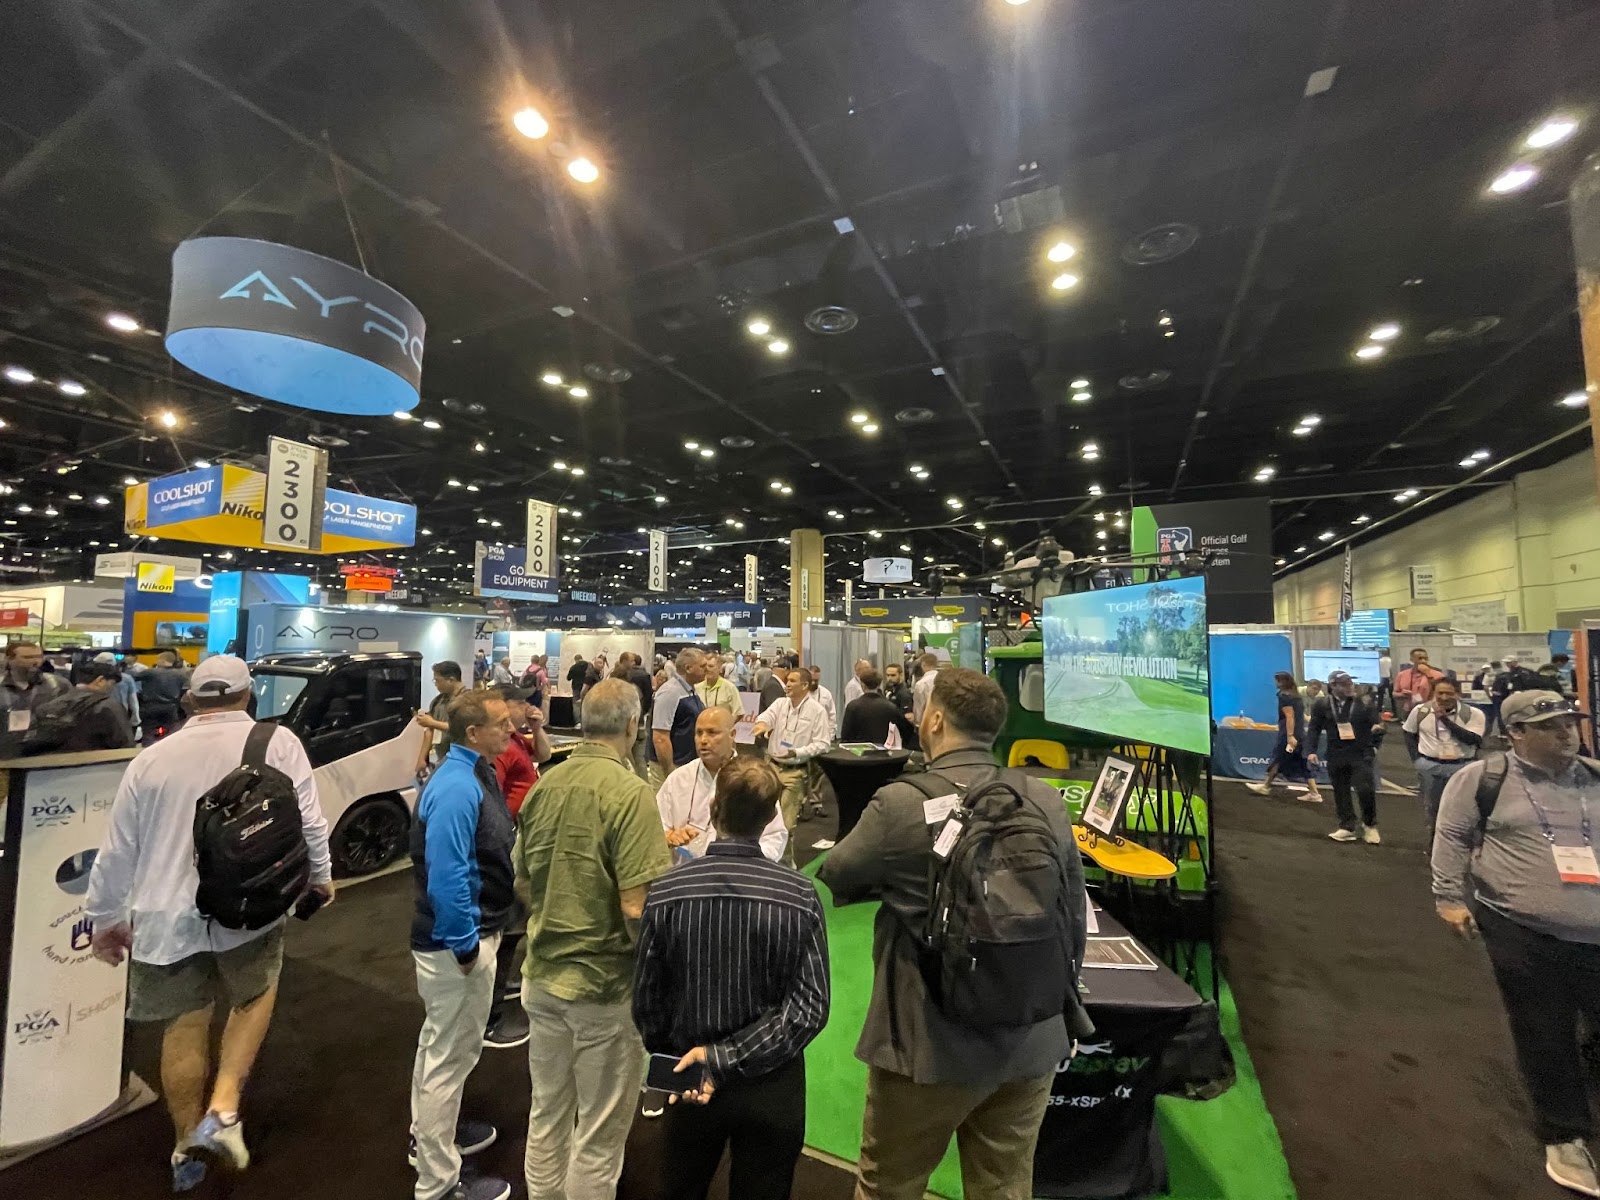 AcuSpray team at PGA Show in Florida, demonstrating Spray Drone technology for innovative golf course management.